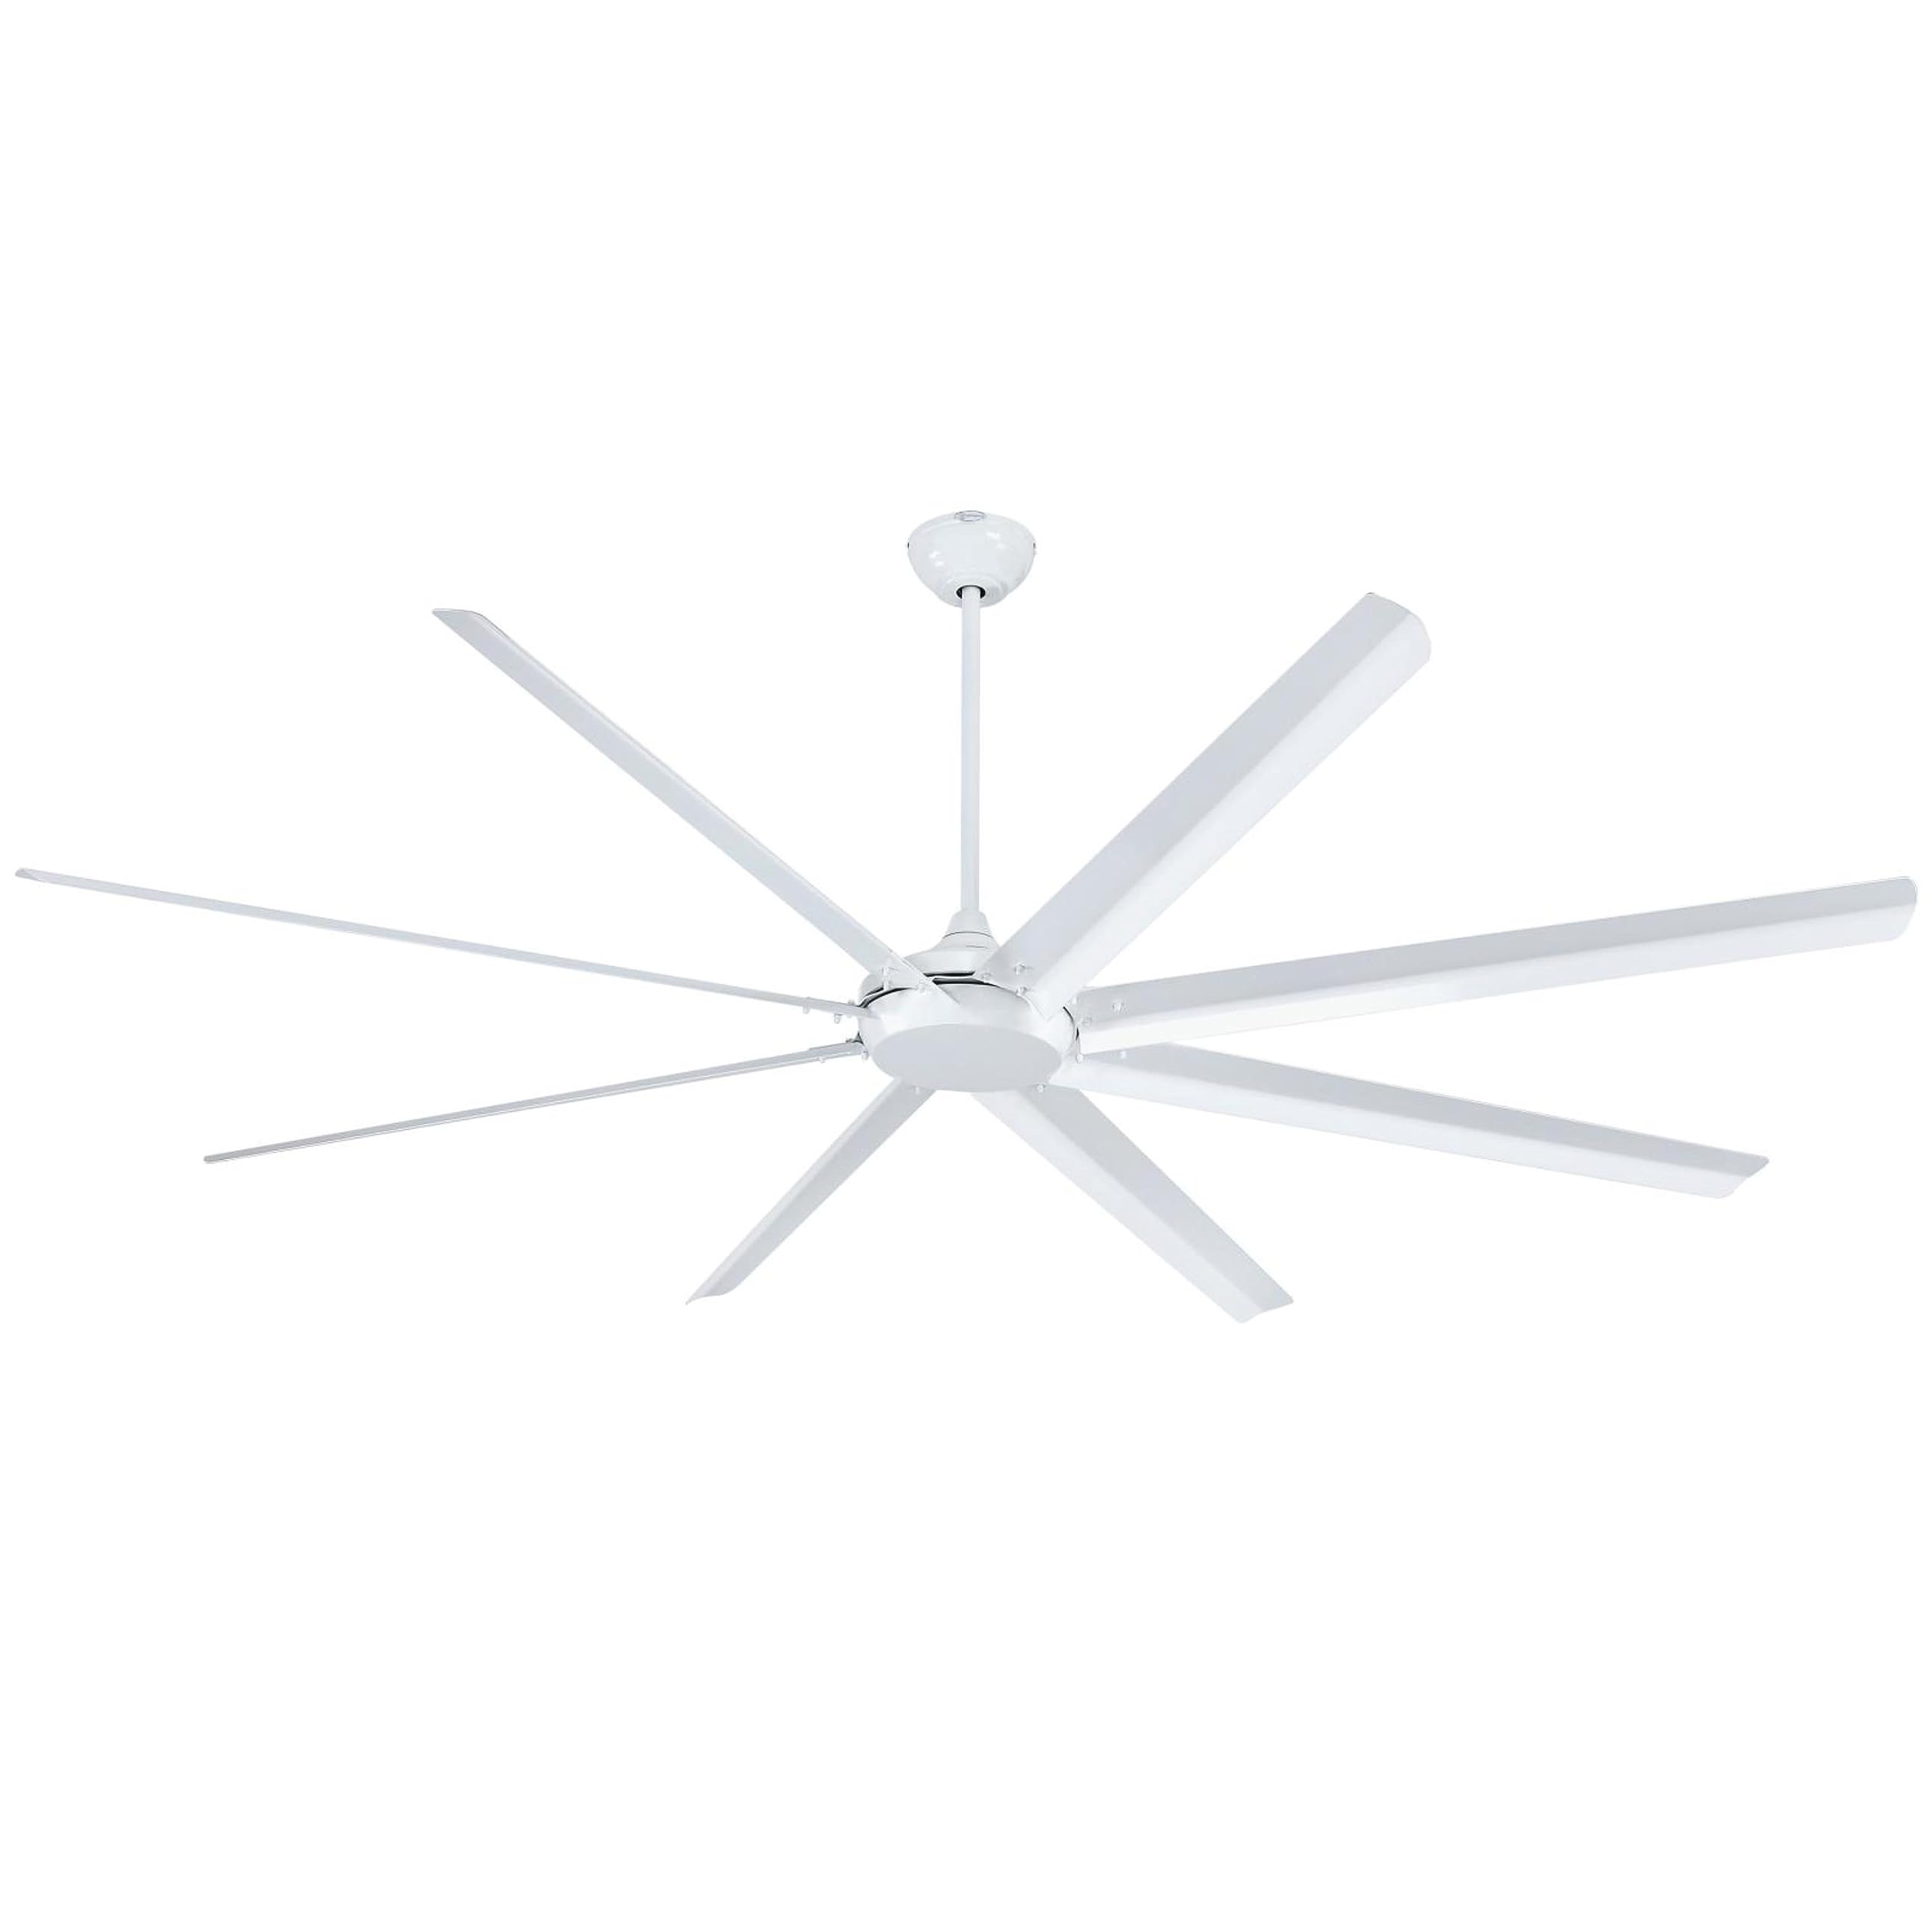 Westinghouse Lighting Widespan, Industrial Indoor/Outdoor Ceiling Fan with Remote Control, 100 Inch, White Finish, DC Motor